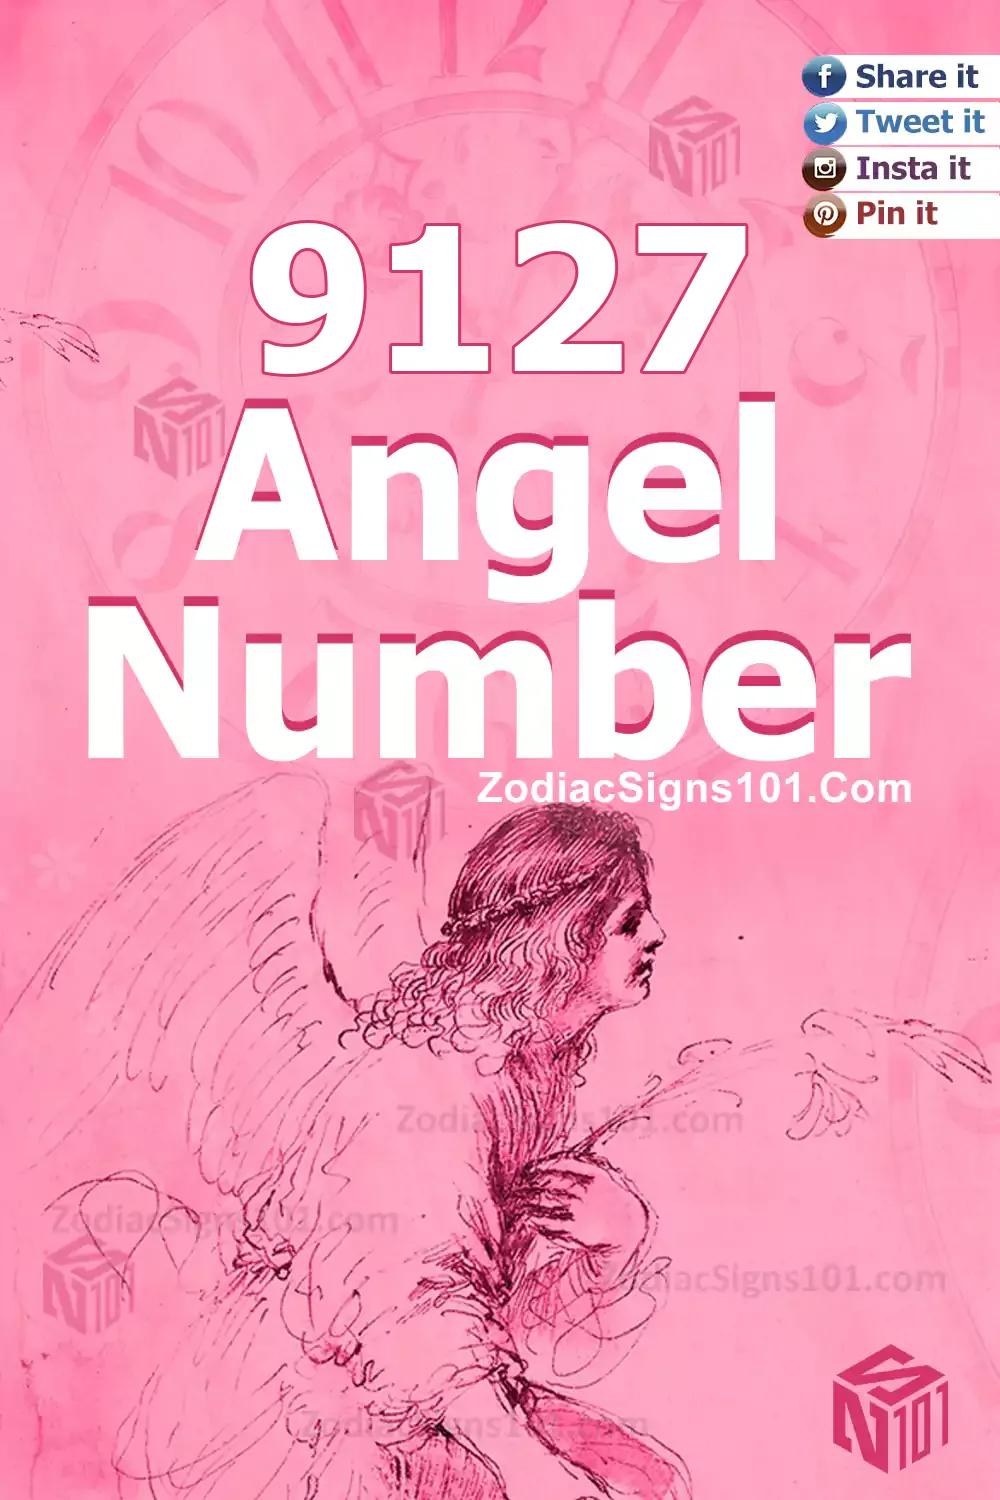 9127 Angel Number Meaning